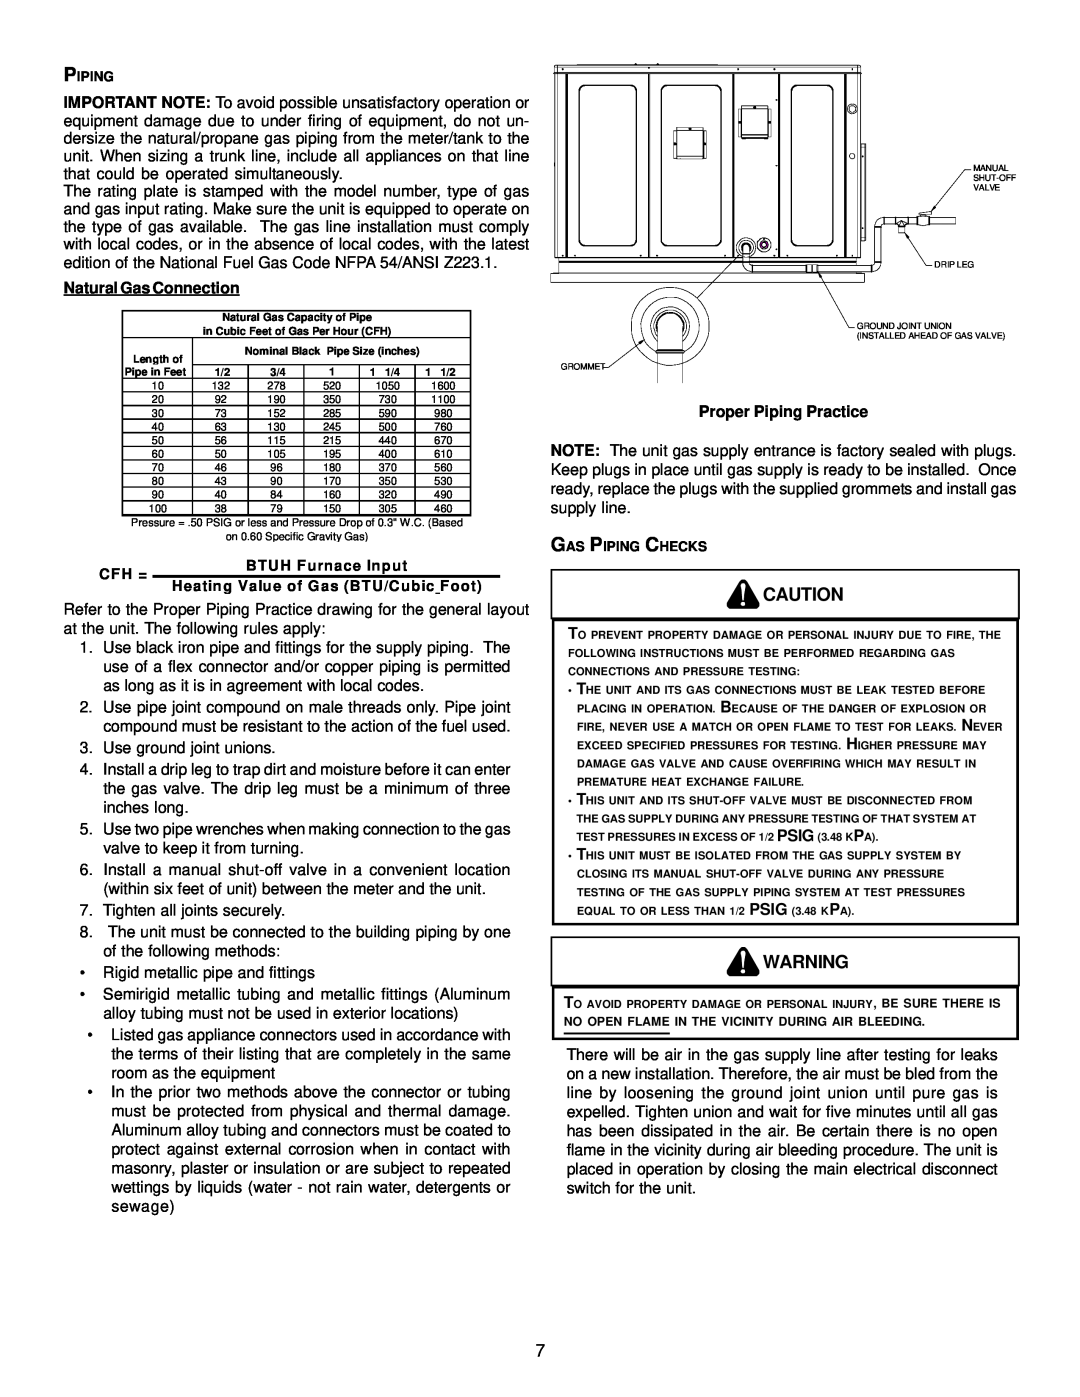 Goodman Mfg A/GPG13 M operating instructions Natural Gas Connection, Proper Piping Practice 